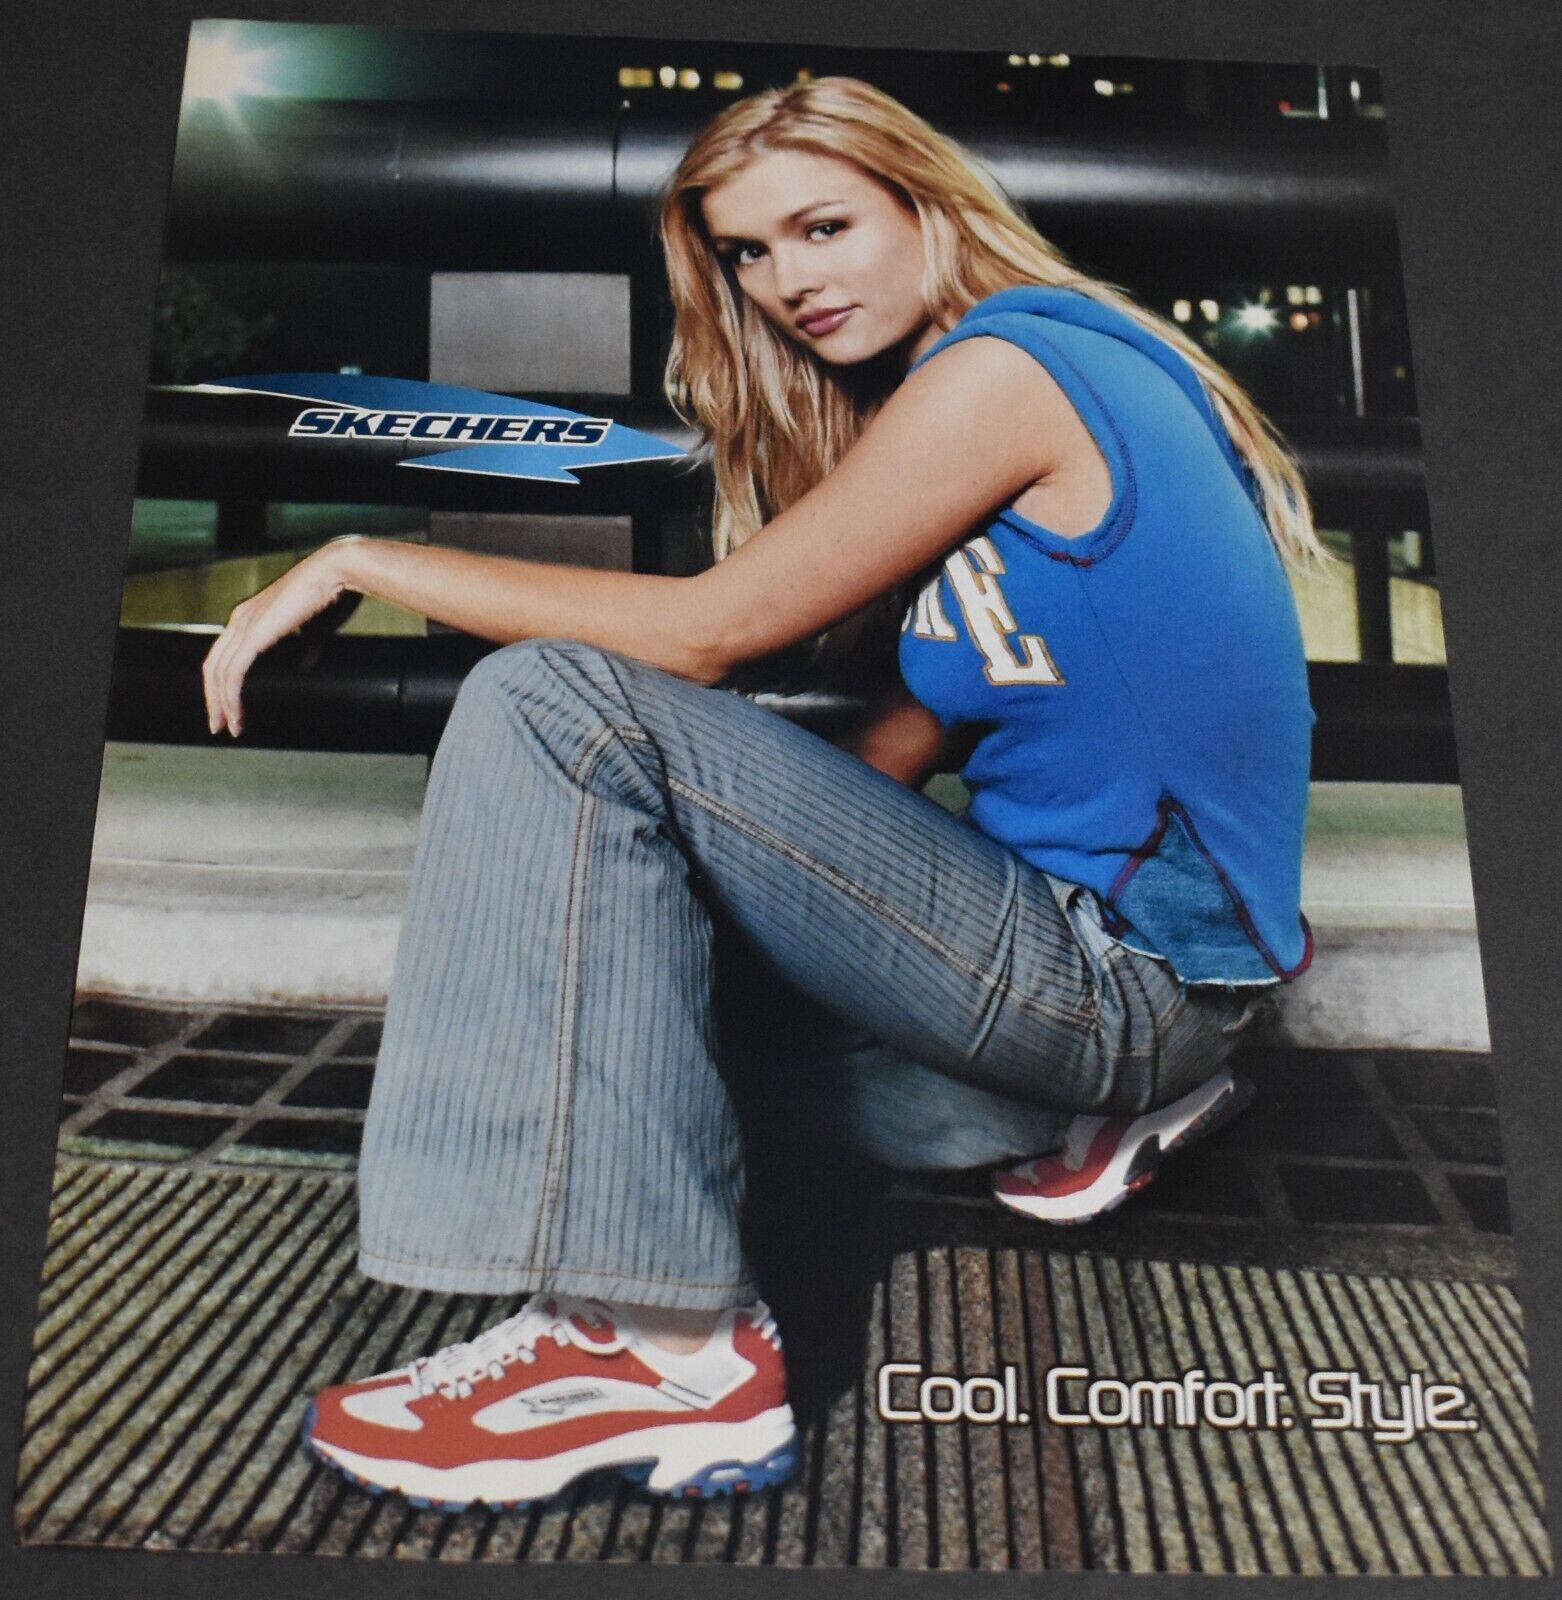 2003 Print Ad Sketchers Cool Comfort Style Blonde Lady Street Art Style Fashion